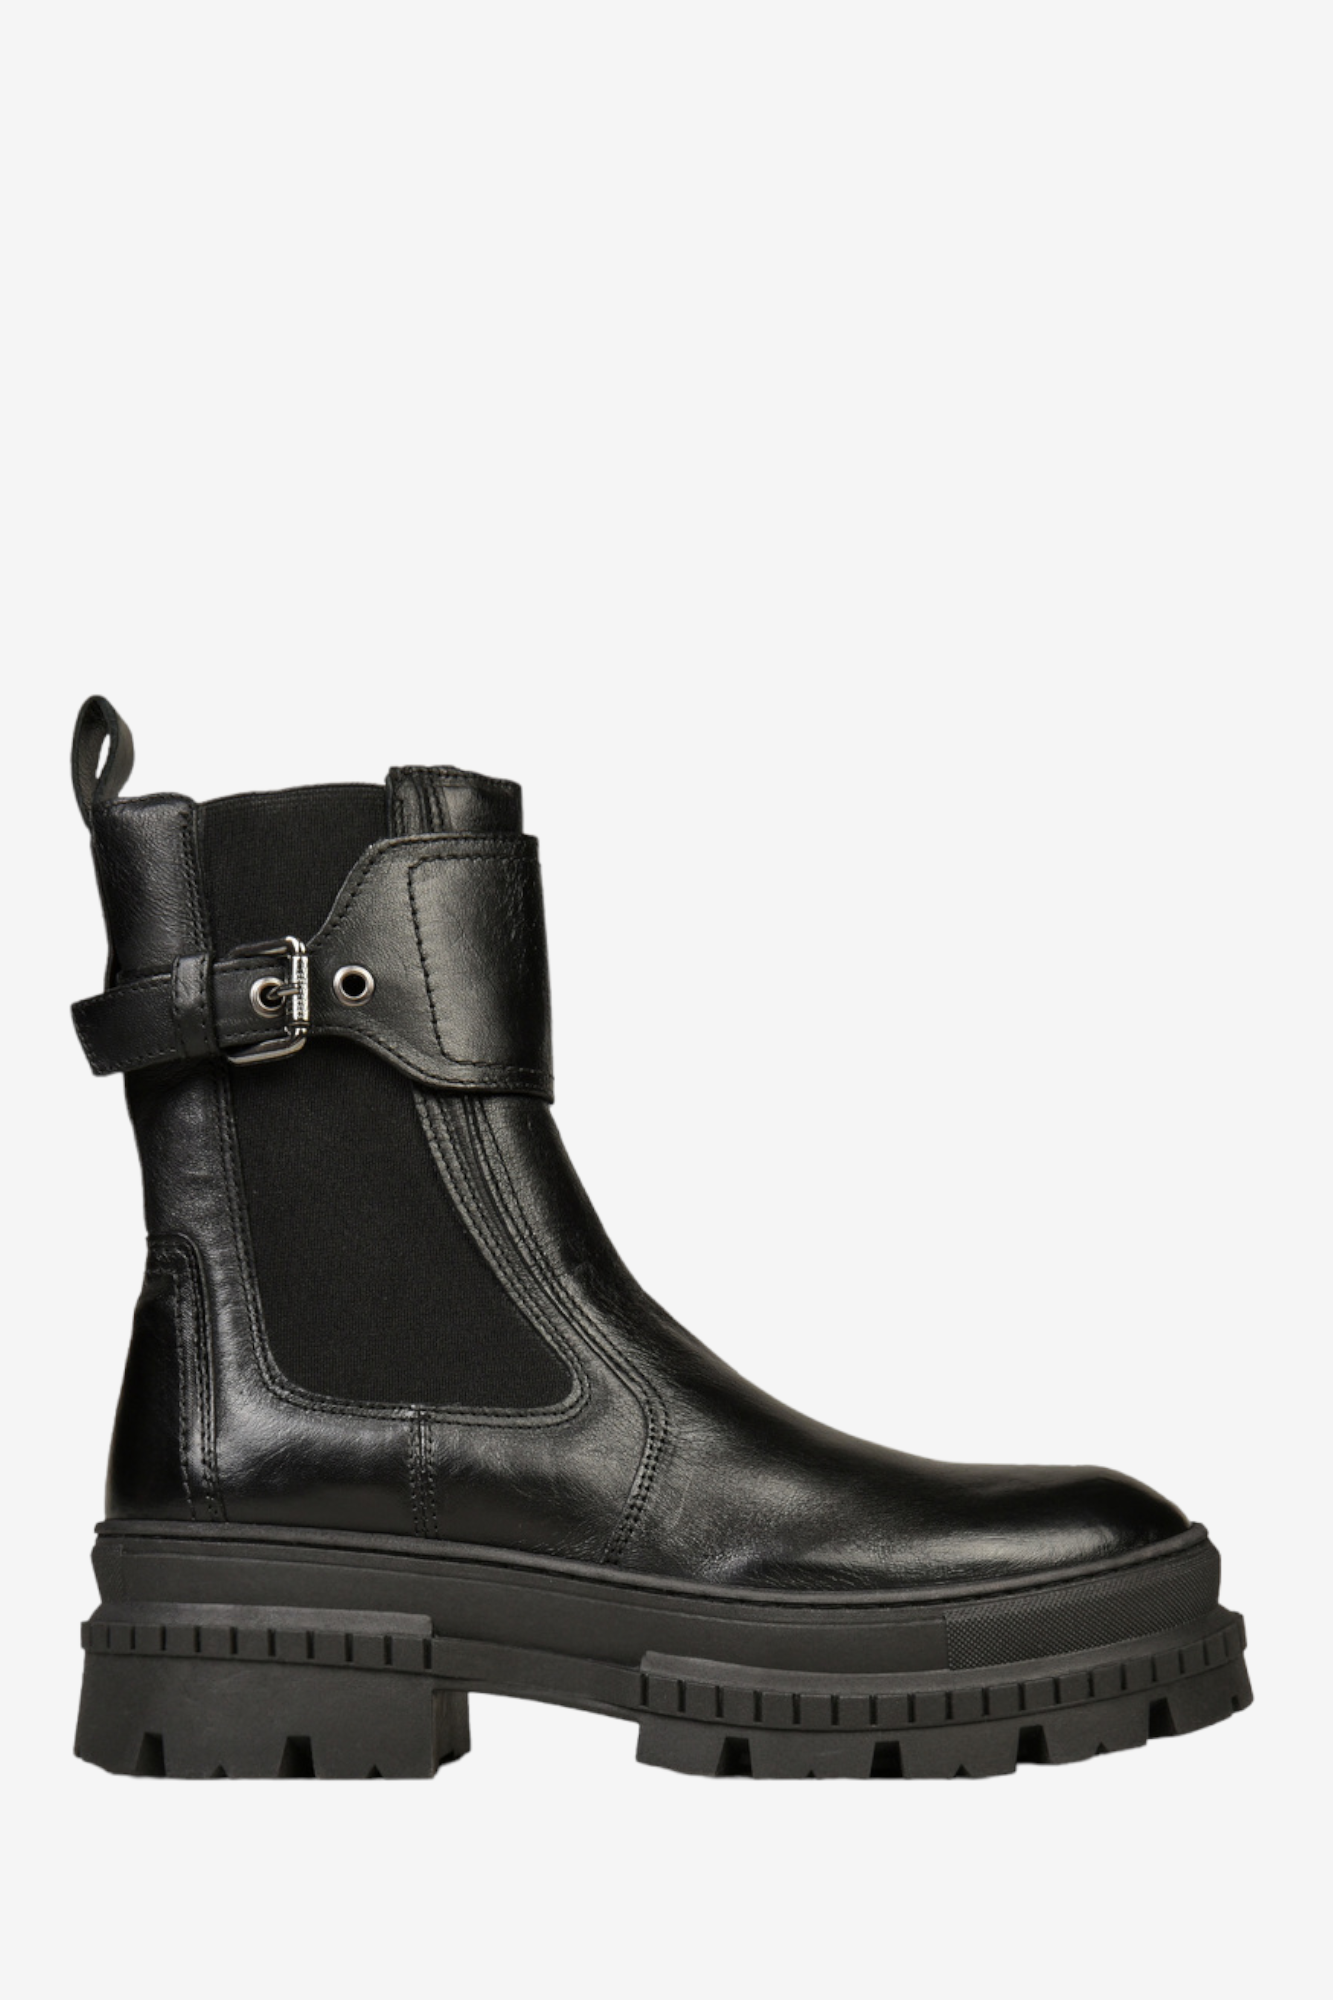 MJUS LUX 68205 BLACK LEATHER BOOT